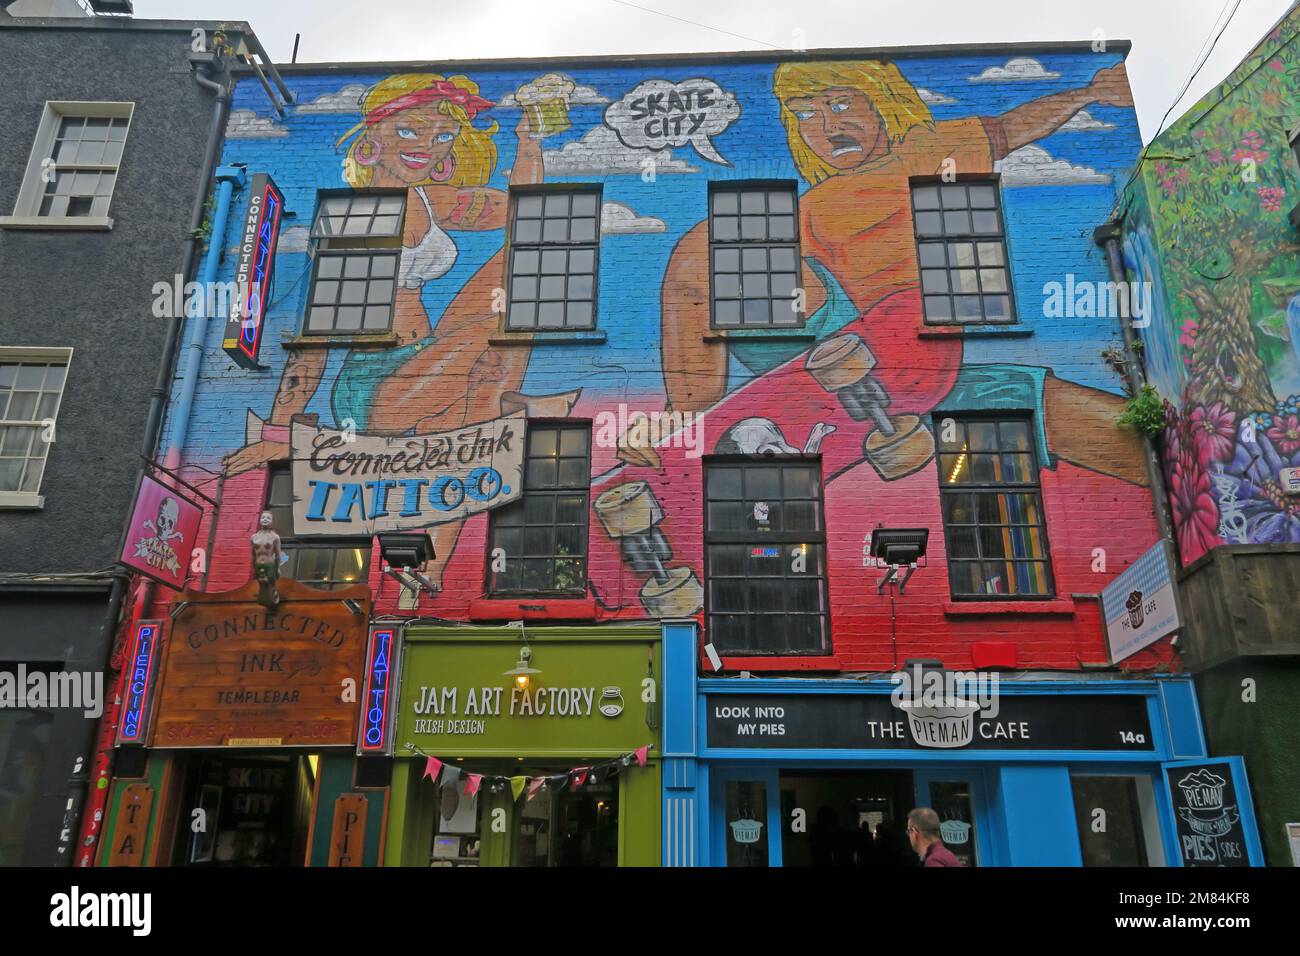 Jam art Factory, Skate City, Connected Ink Tattoo, The Pieman Cafe - 14A Crown Alley, Temple Bar, Dublin 2, D02 RX36, Eire Foto Stock